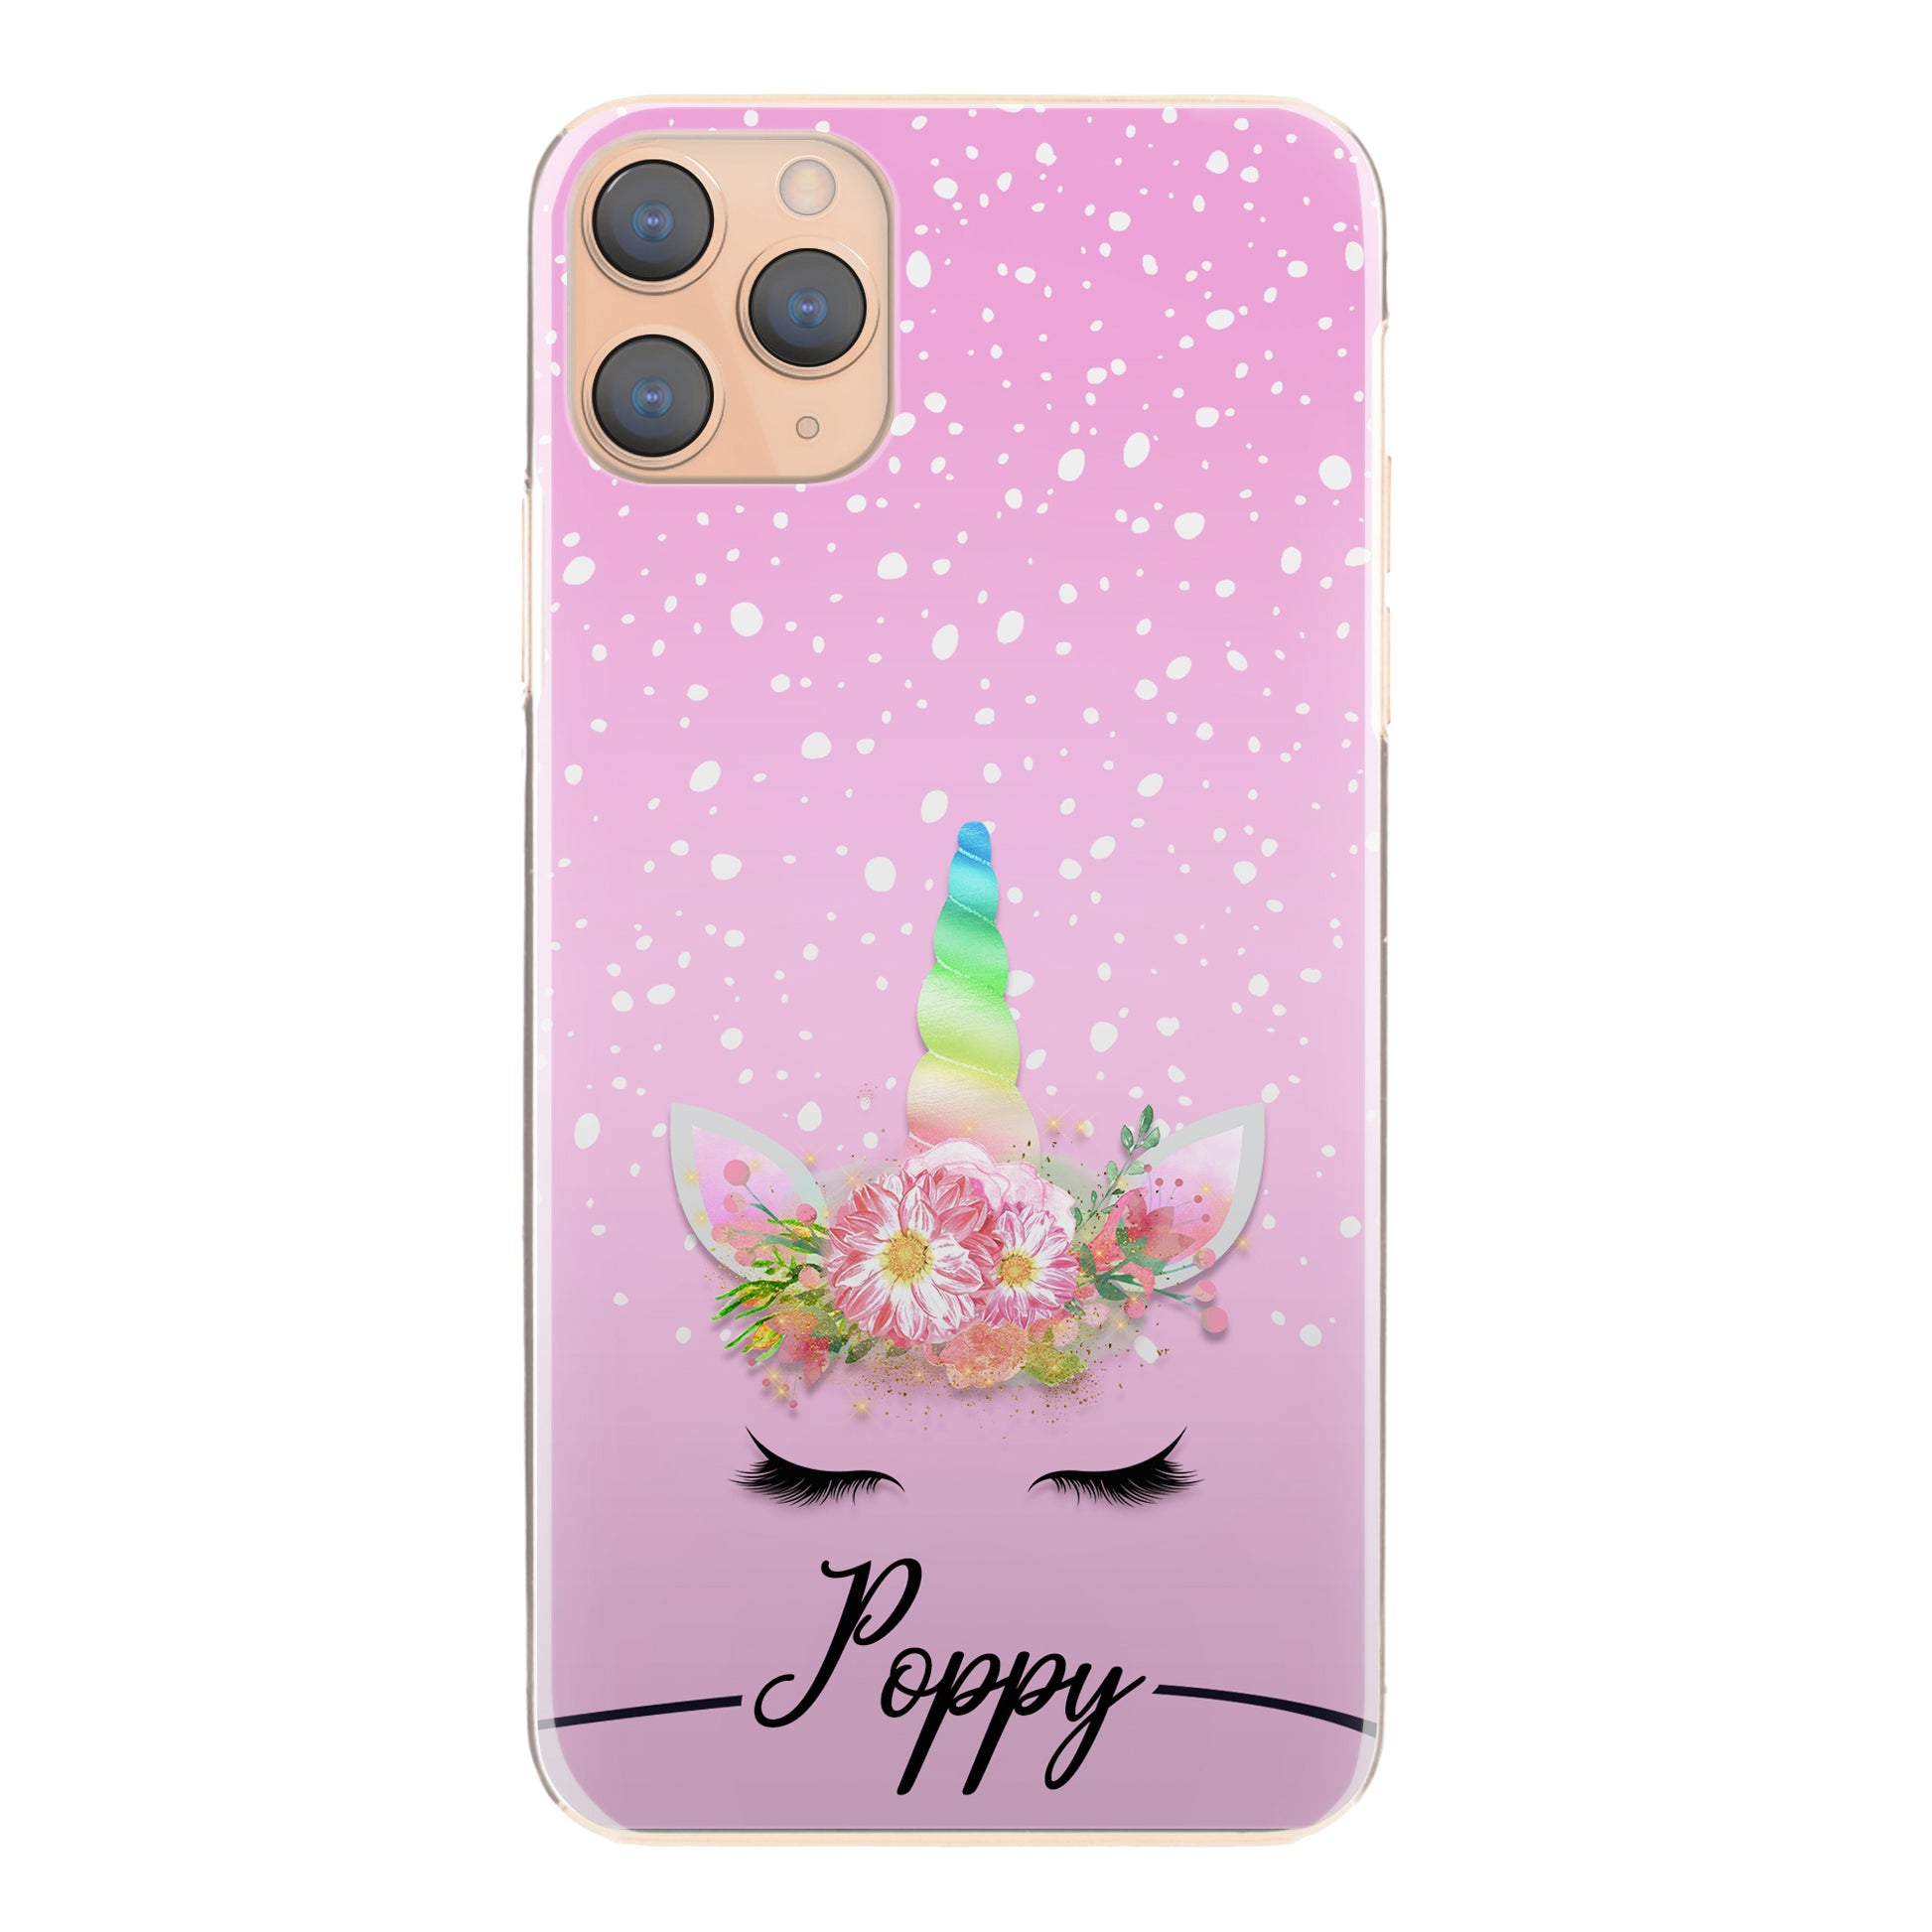 Personalised Xiaomi Phone Hard Case with Rainbow Floral Unicorn and Text on Pink